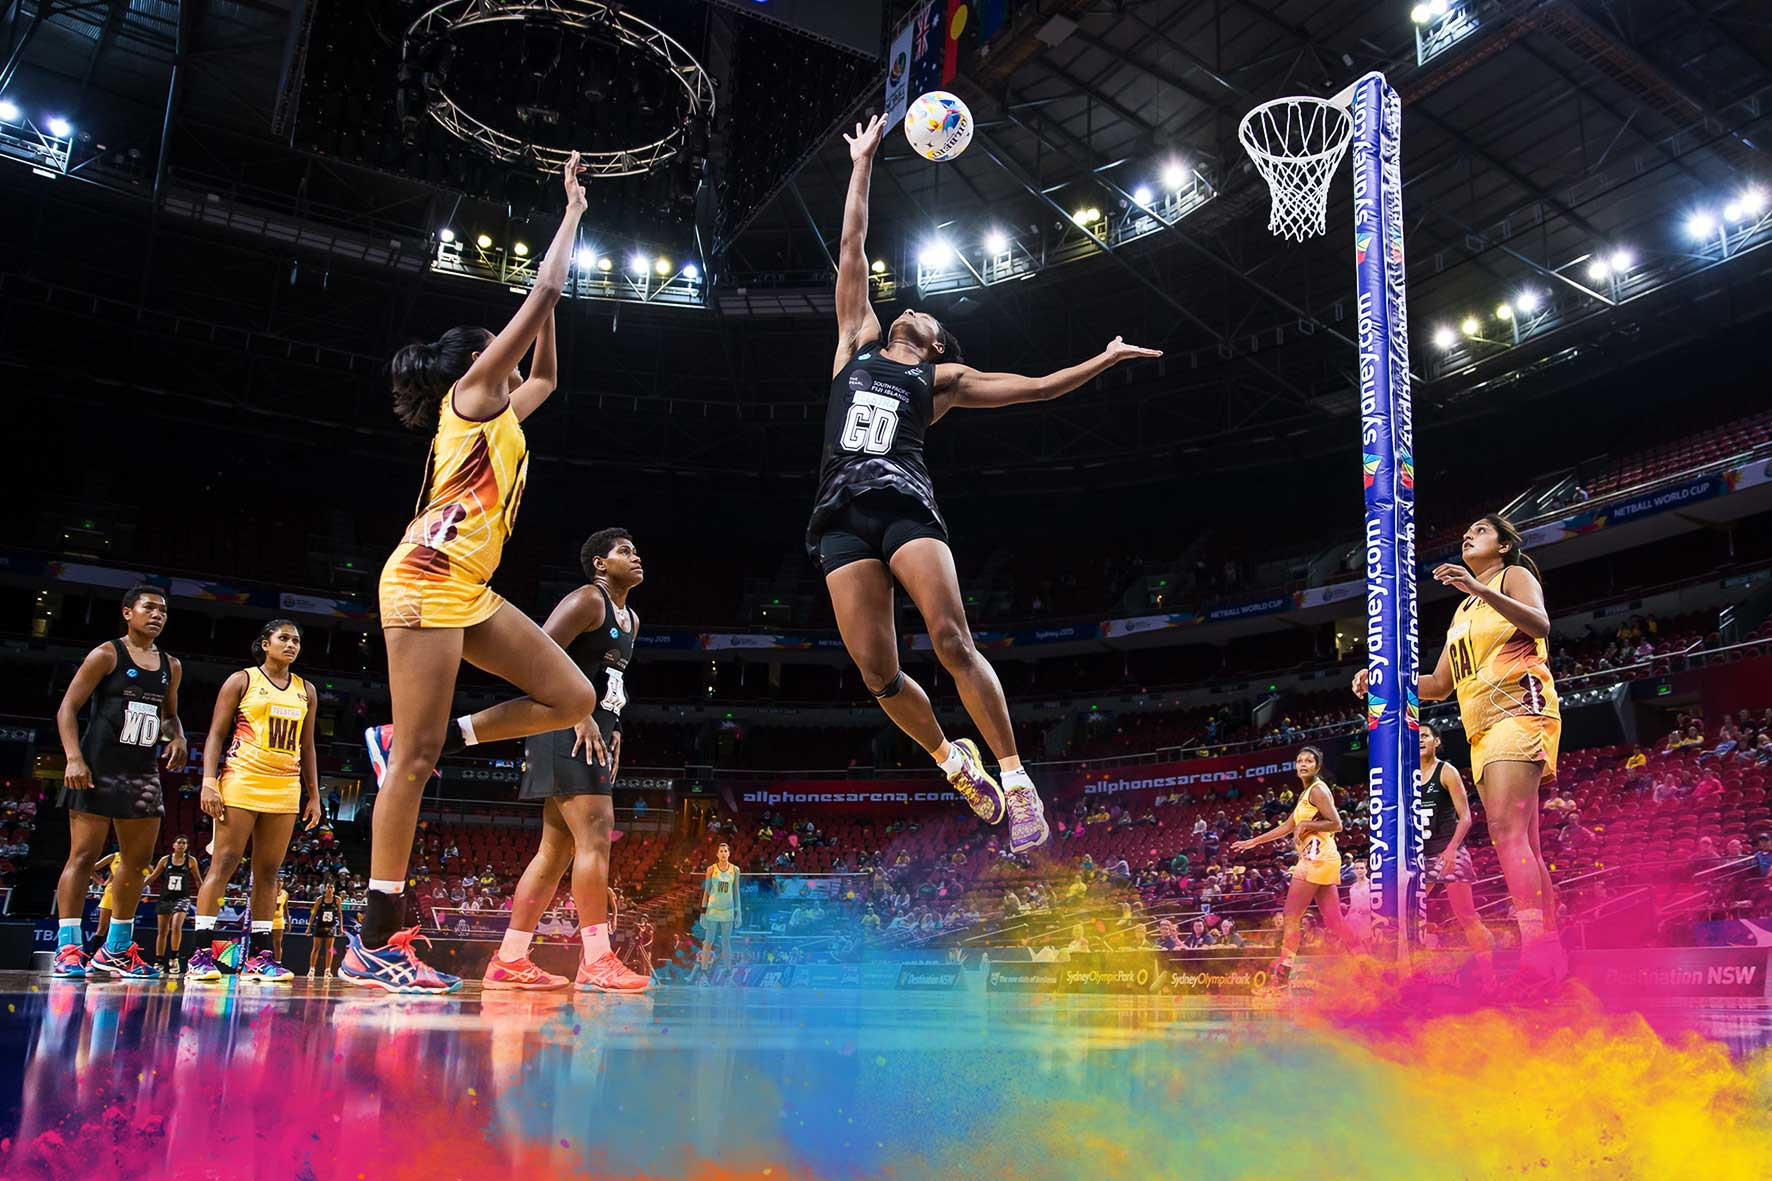 Dance, music, projections and pyrotechnics will be witnessed by an arena audience of more than 6,000 people and an international TV audience of hundreds of thousands during the Opening Ceremony for the Netball World Cup in Liverpool ©NWC2019